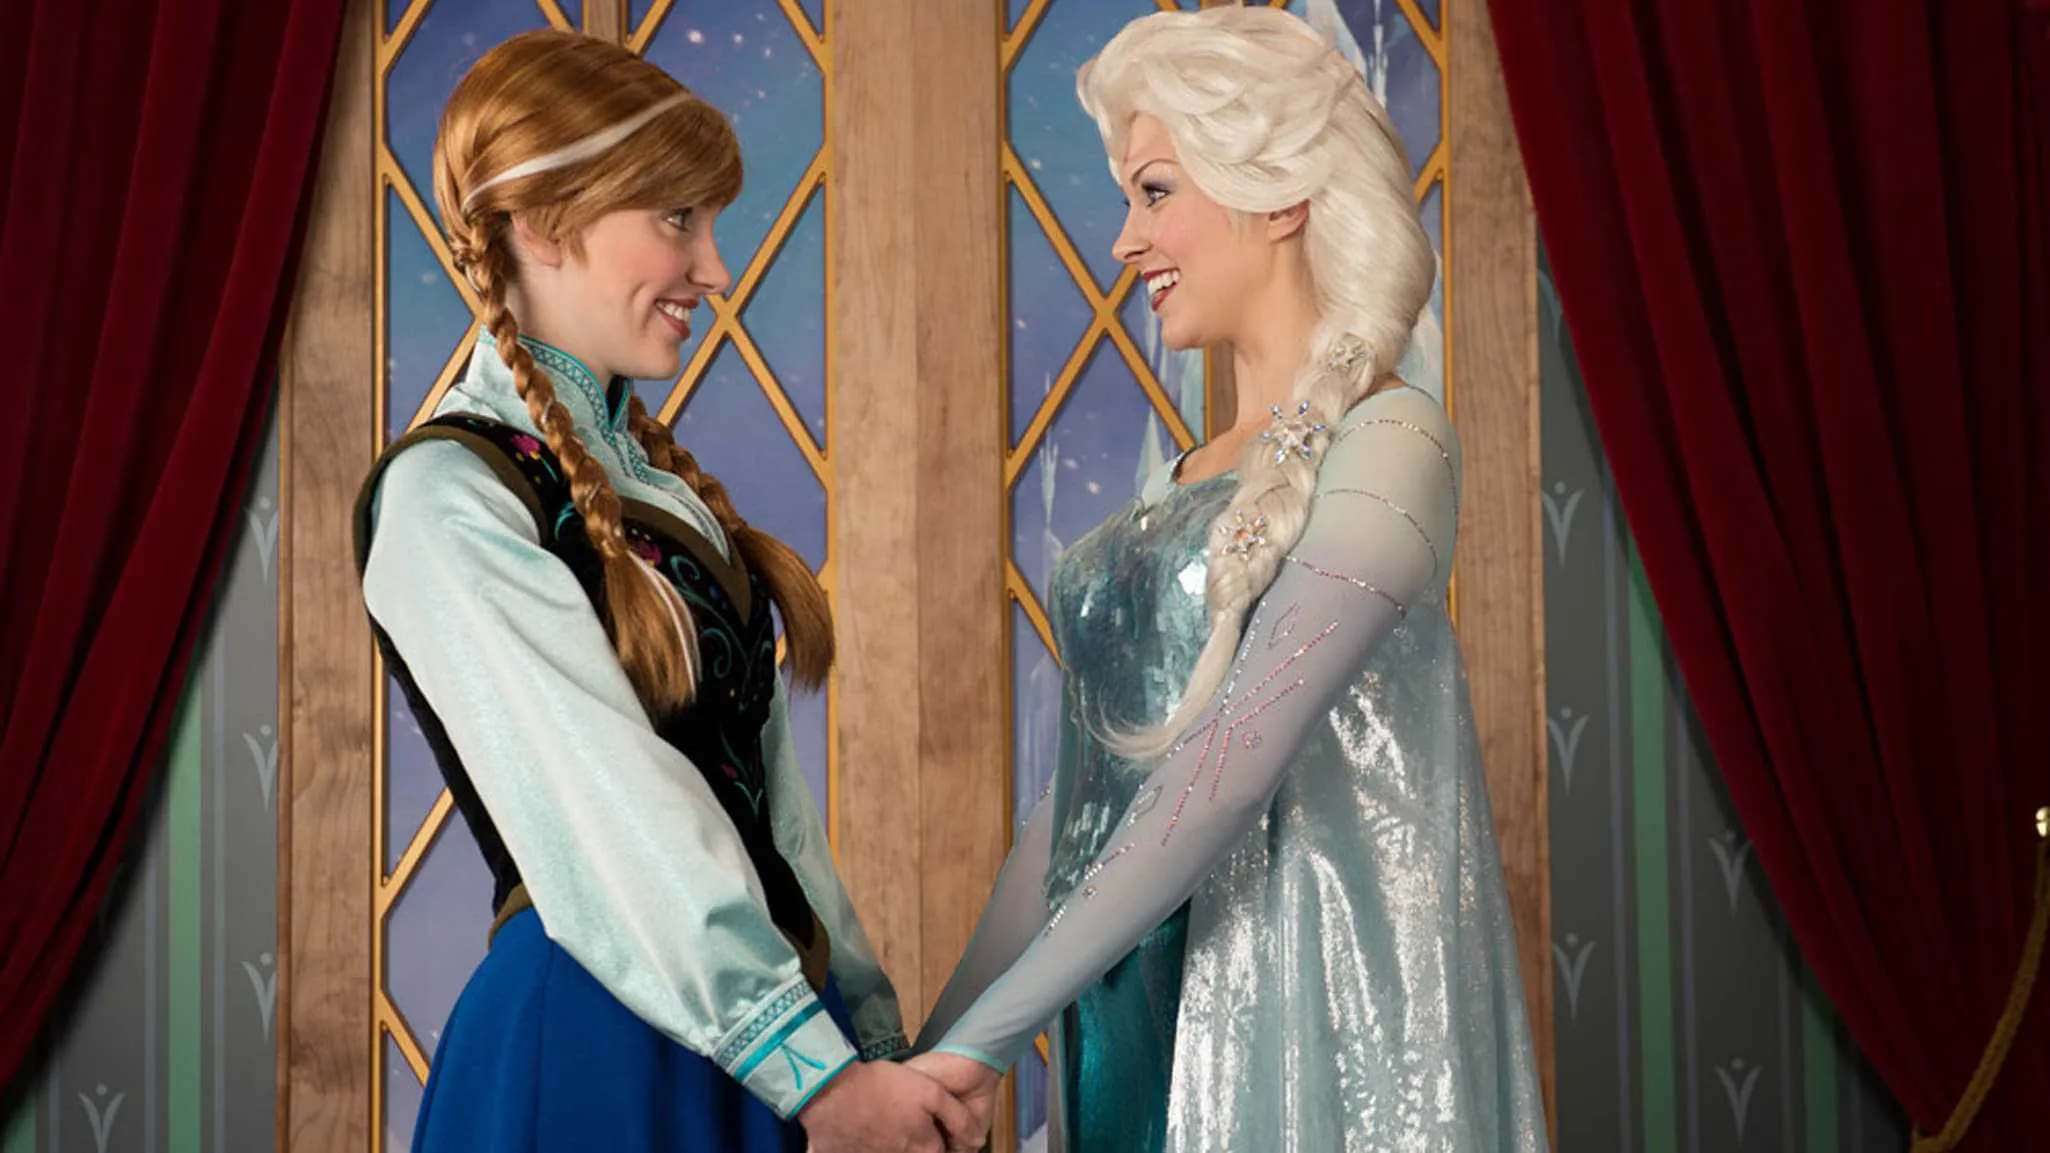 Norway – Anna & Elsa at the Royal Sommerhus (character meet) – Temporarily Unavailable